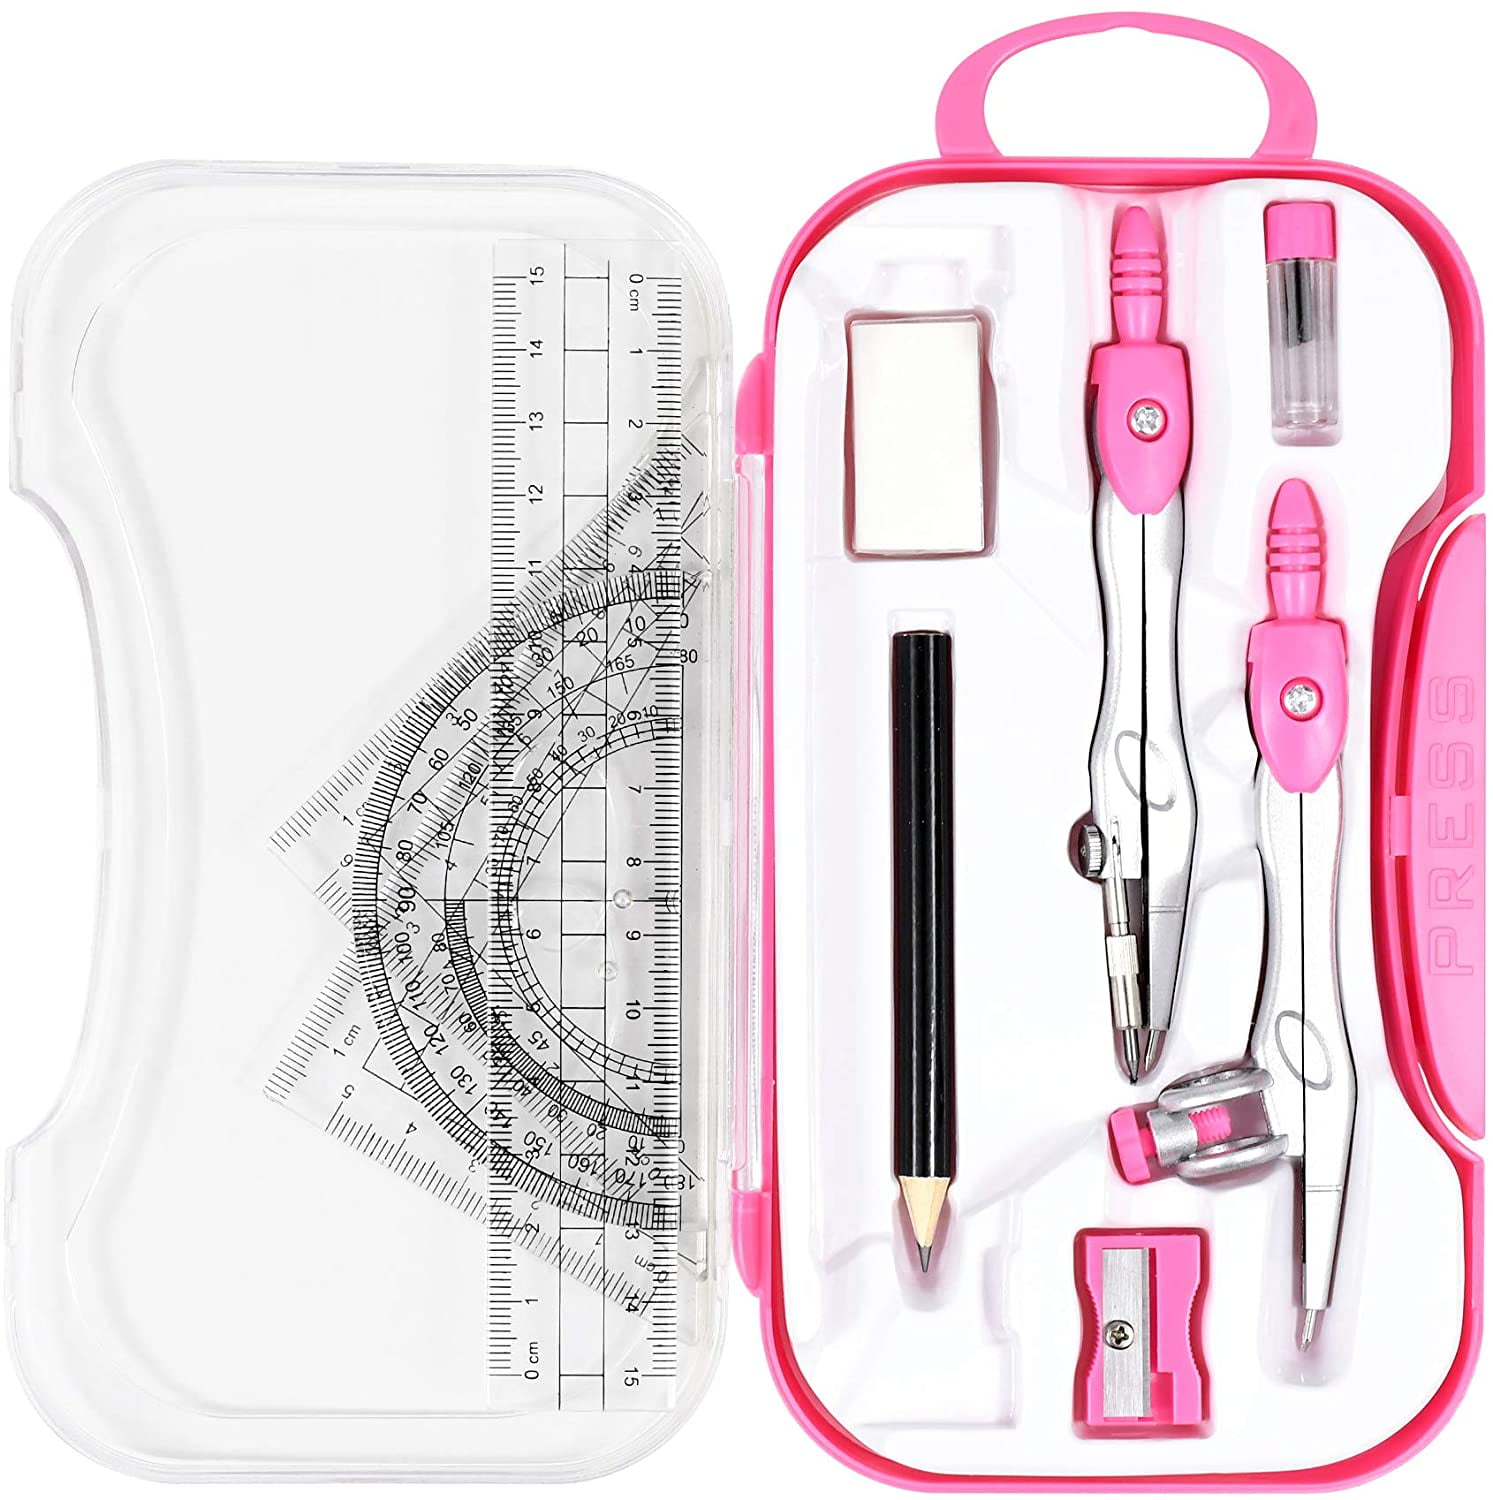 DWE Geometry Set 8 Pieces Math Geometry Kit Student Supplies with Shatterproof Storage Box Includes Rulers,Protractor,Compass,Pencil Lead Refills,Pencil,Eraser